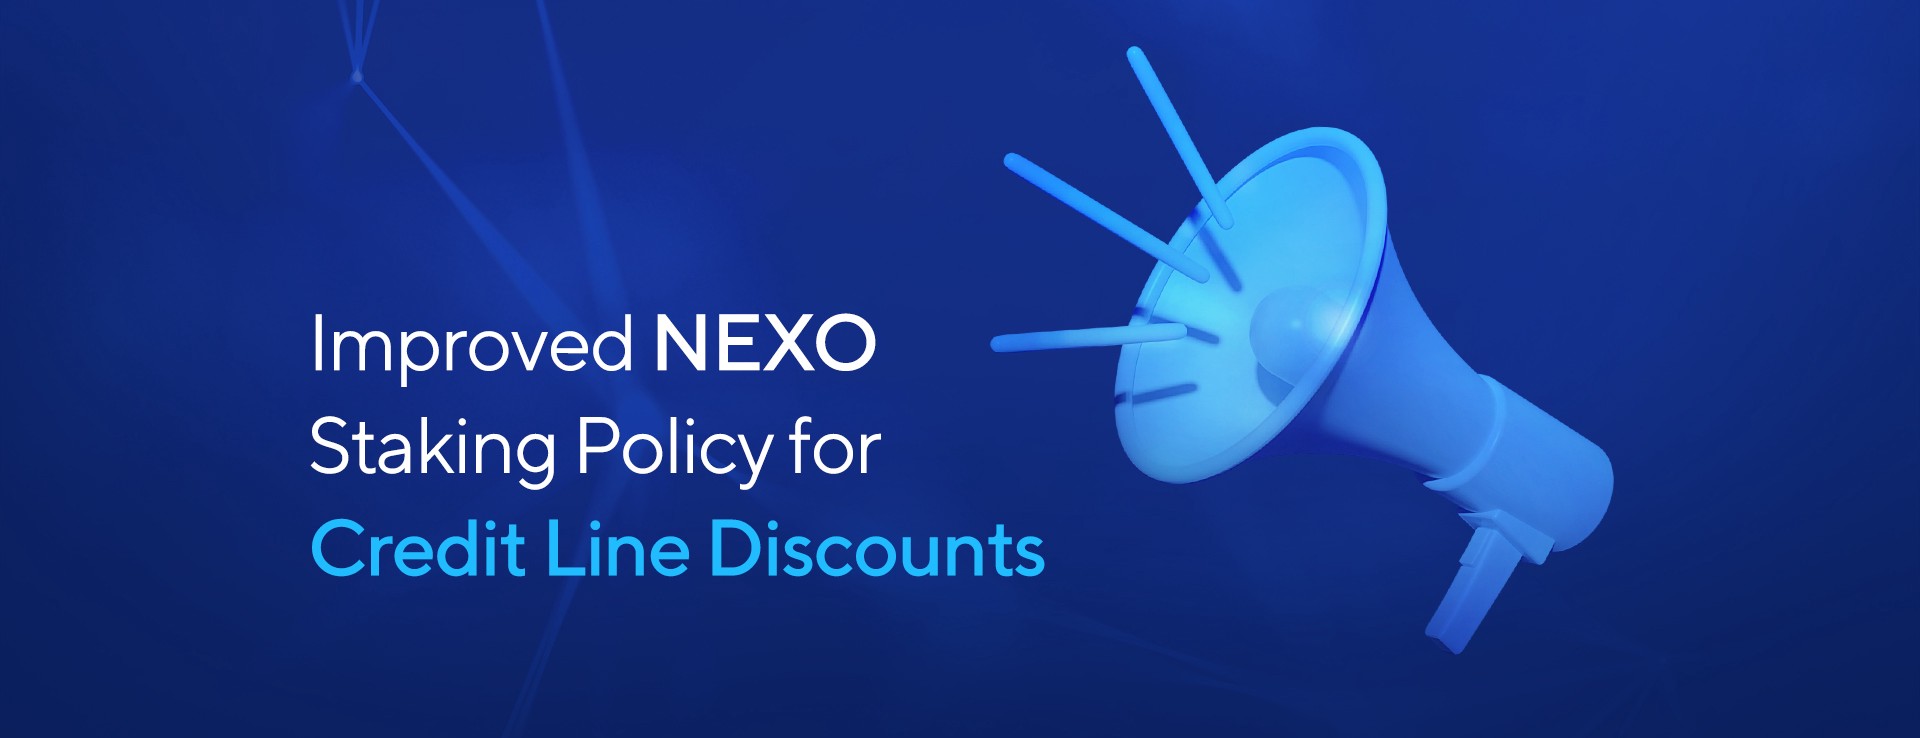 Improved NEXO Staking Policy for Credit Line Discounts